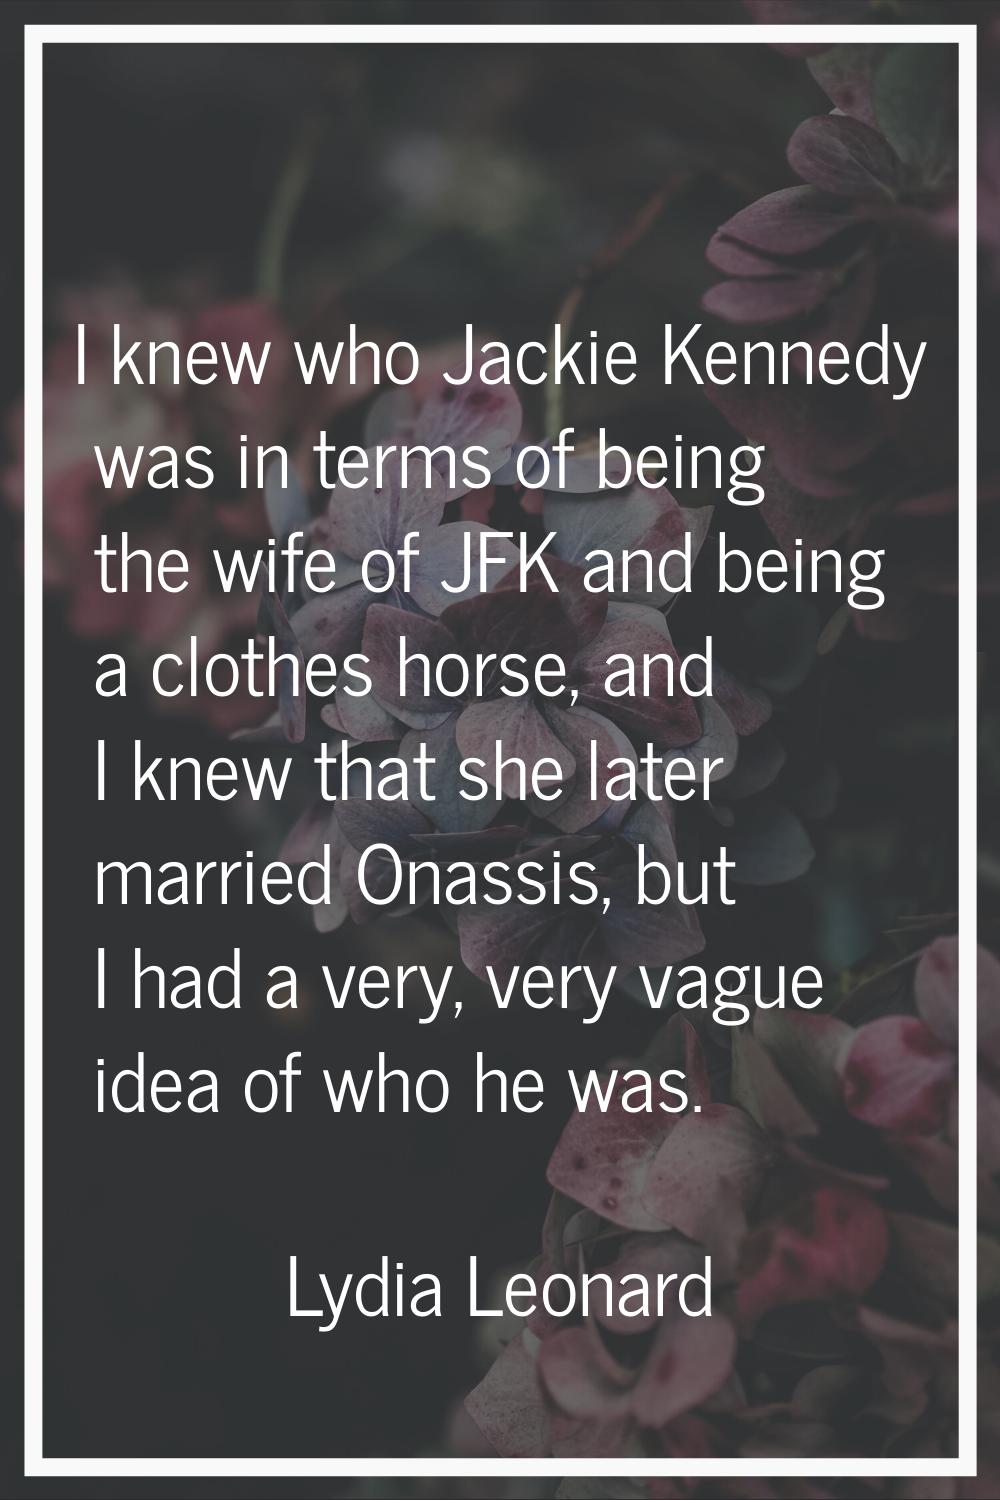 I knew who Jackie Kennedy was in terms of being the wife of JFK and being a clothes horse, and I kn